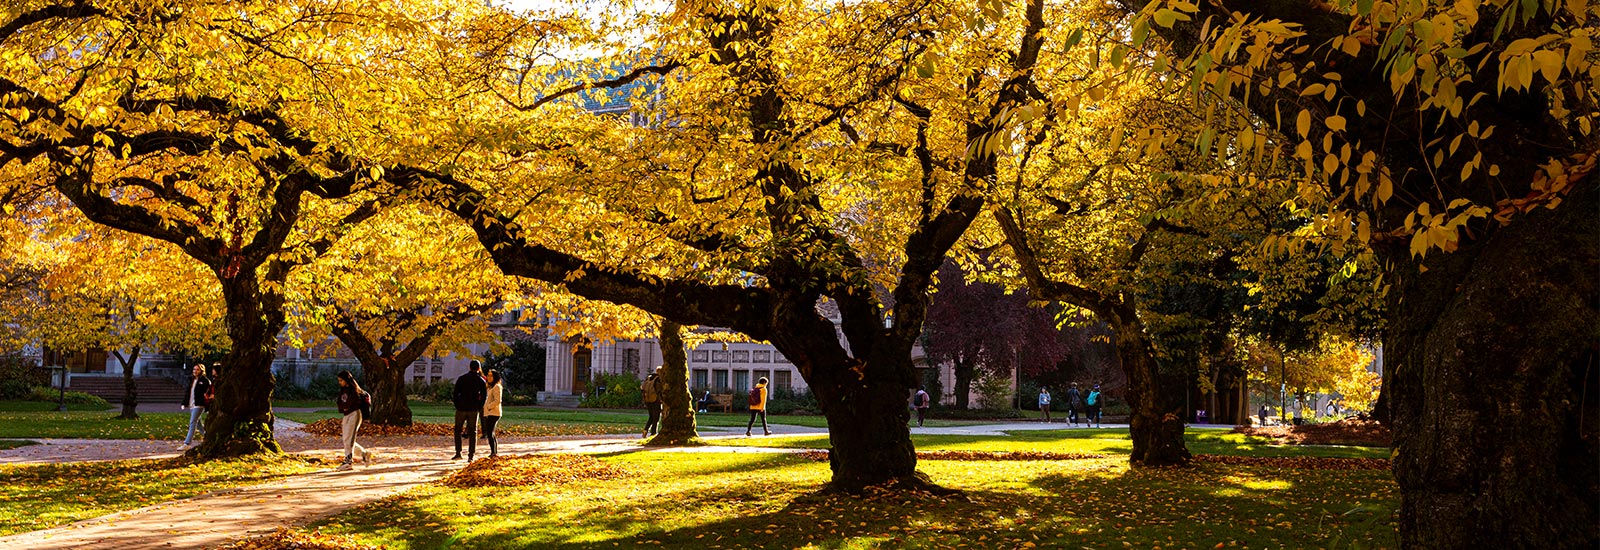 Trees on campus with gold leaves during the fall